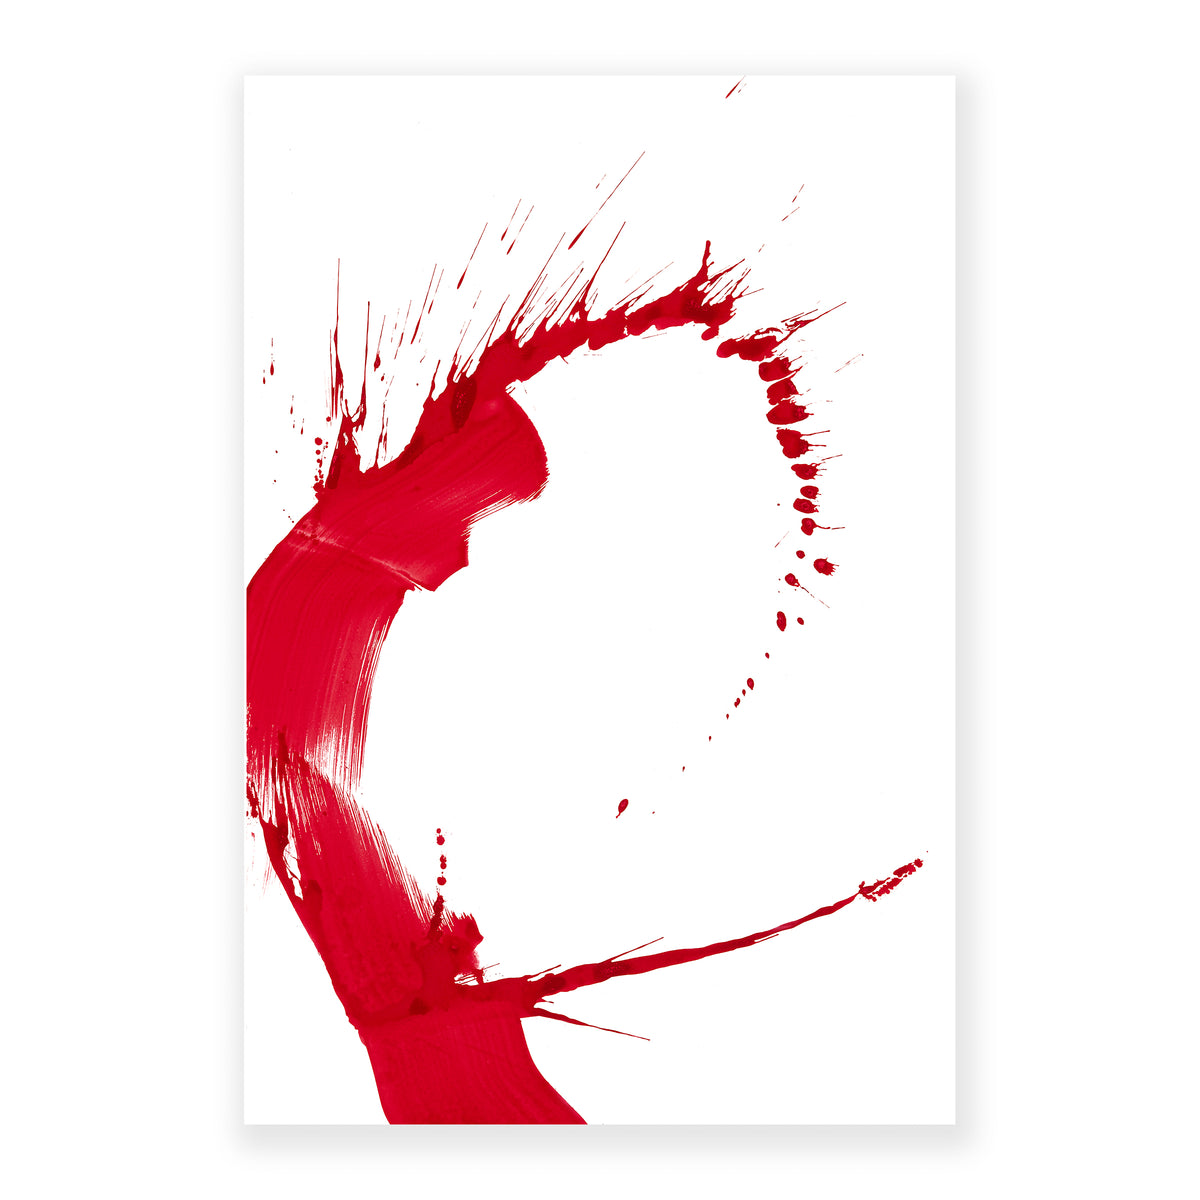 An original abstract painting illustrating brush strokes and splatter featuring red hues painted with watercolor on a soft white background